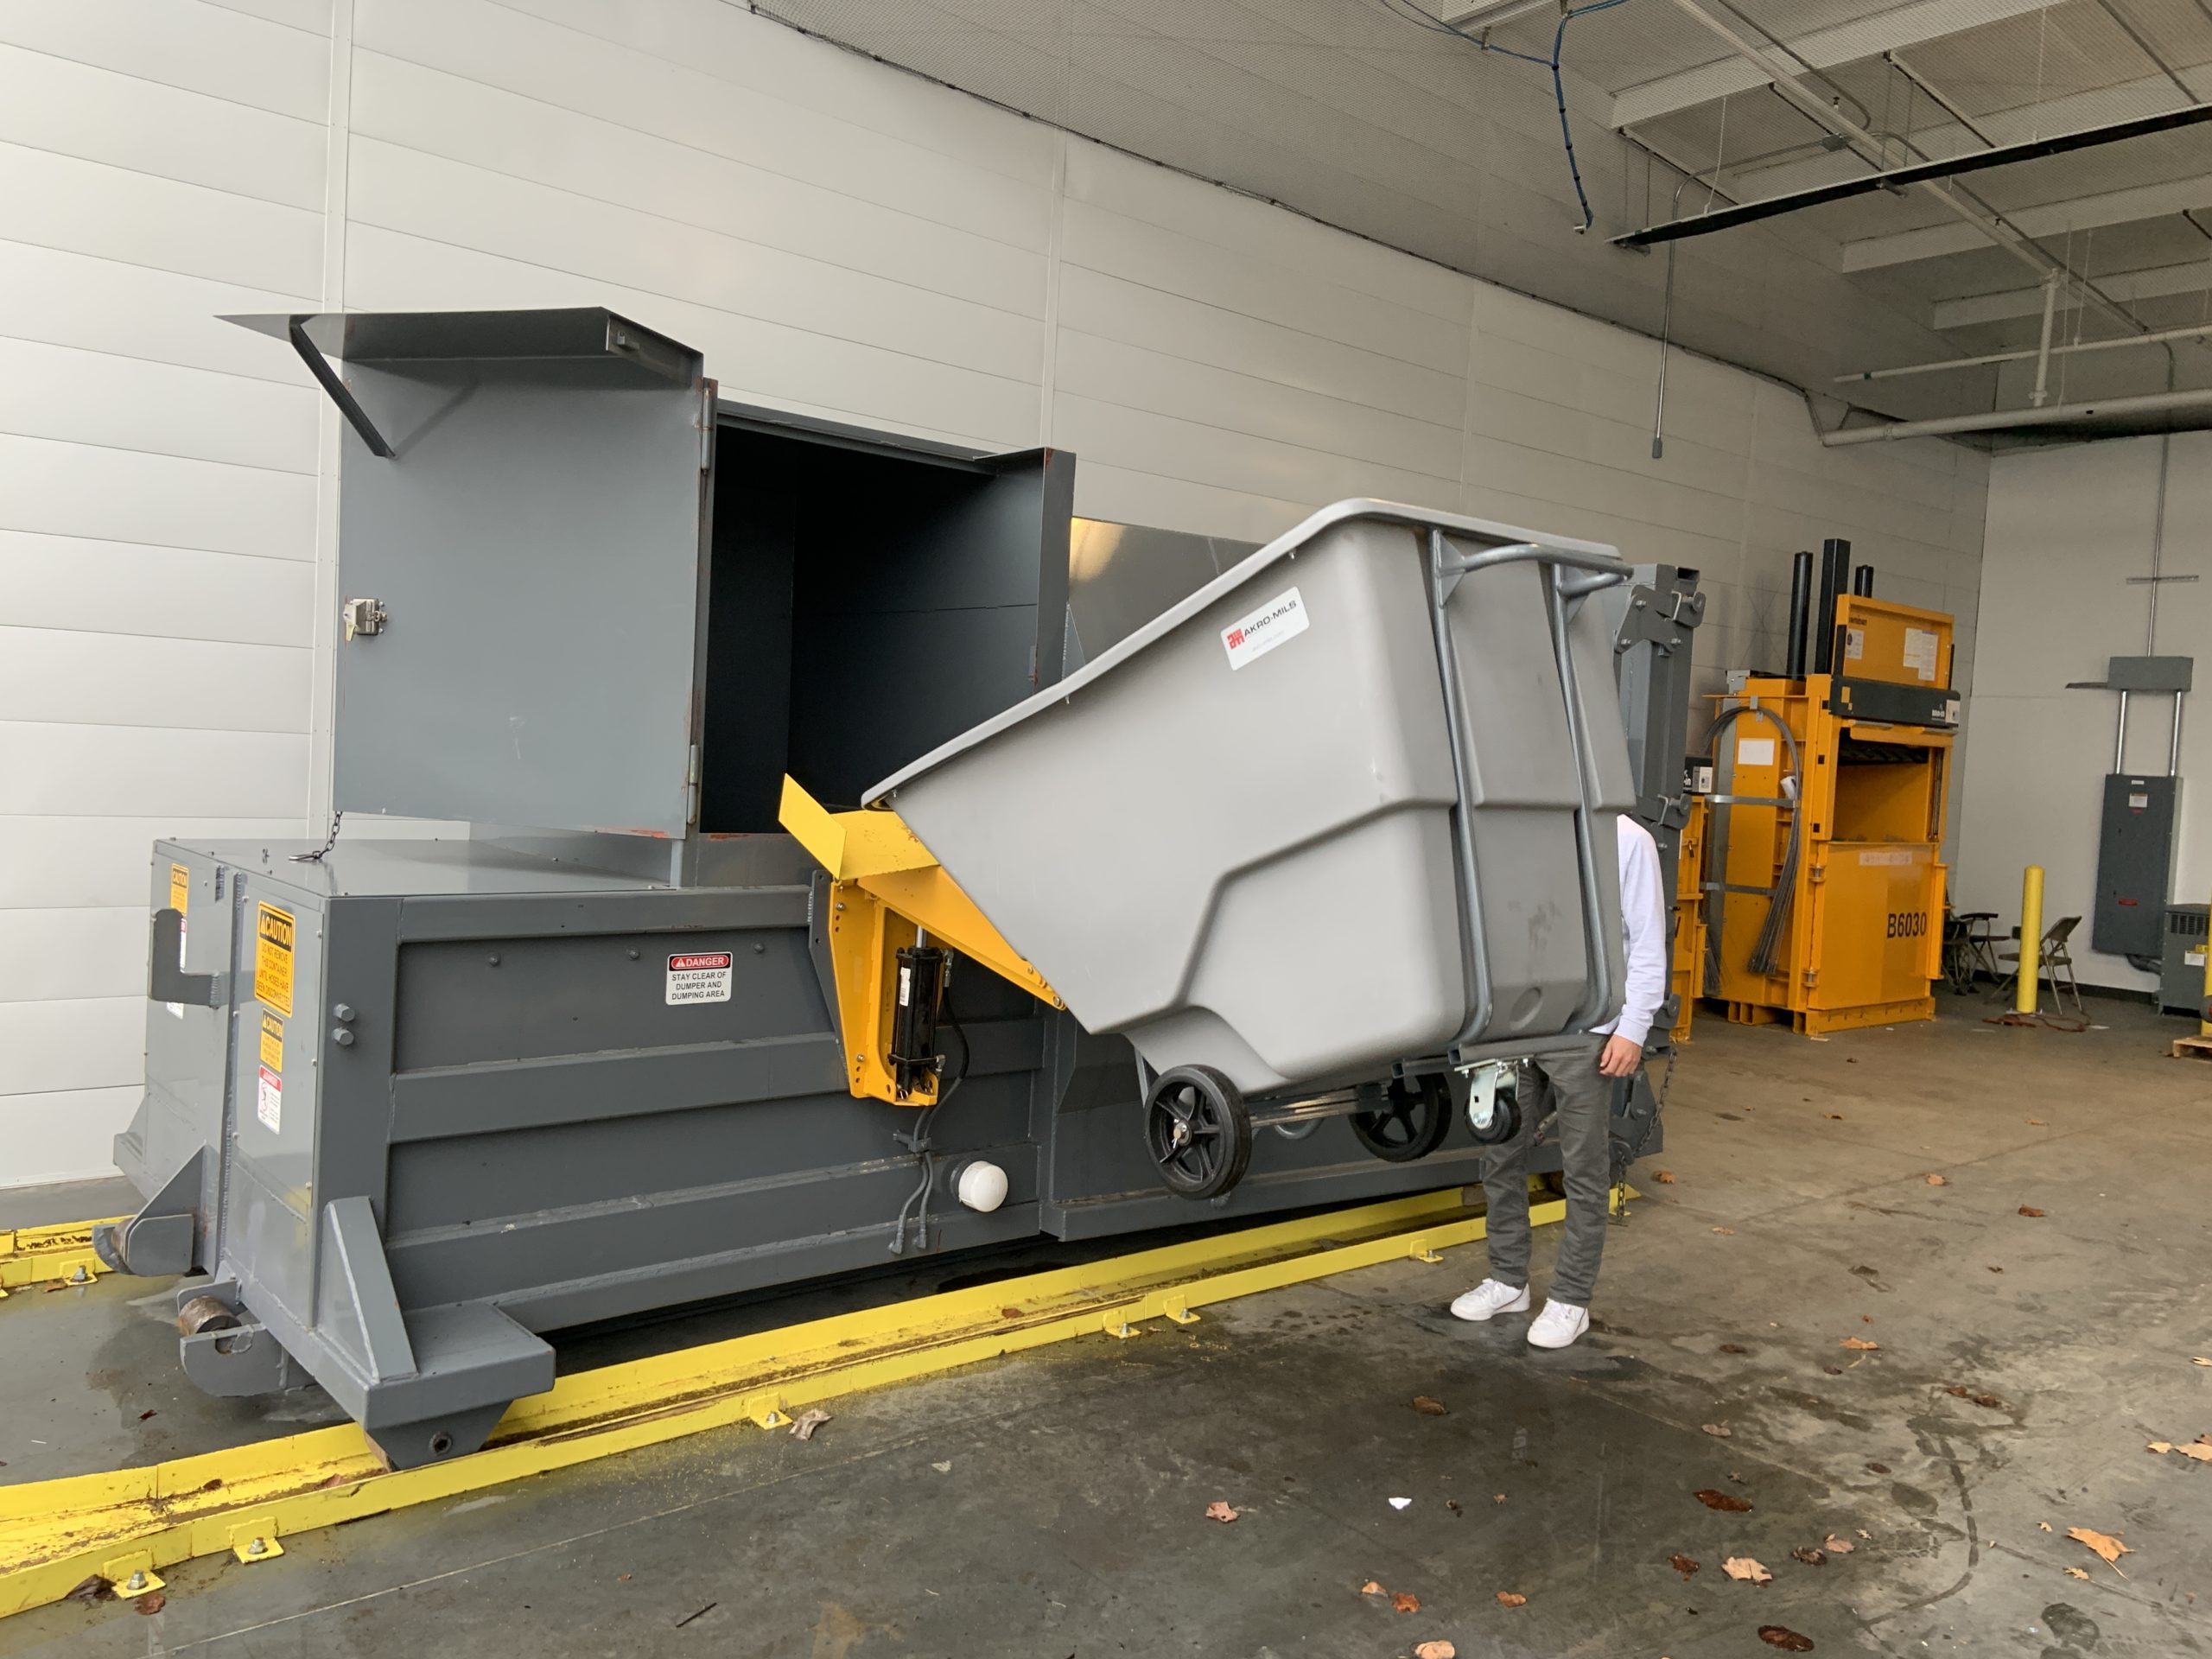 Who Needs a Commercial Trash Compactor?